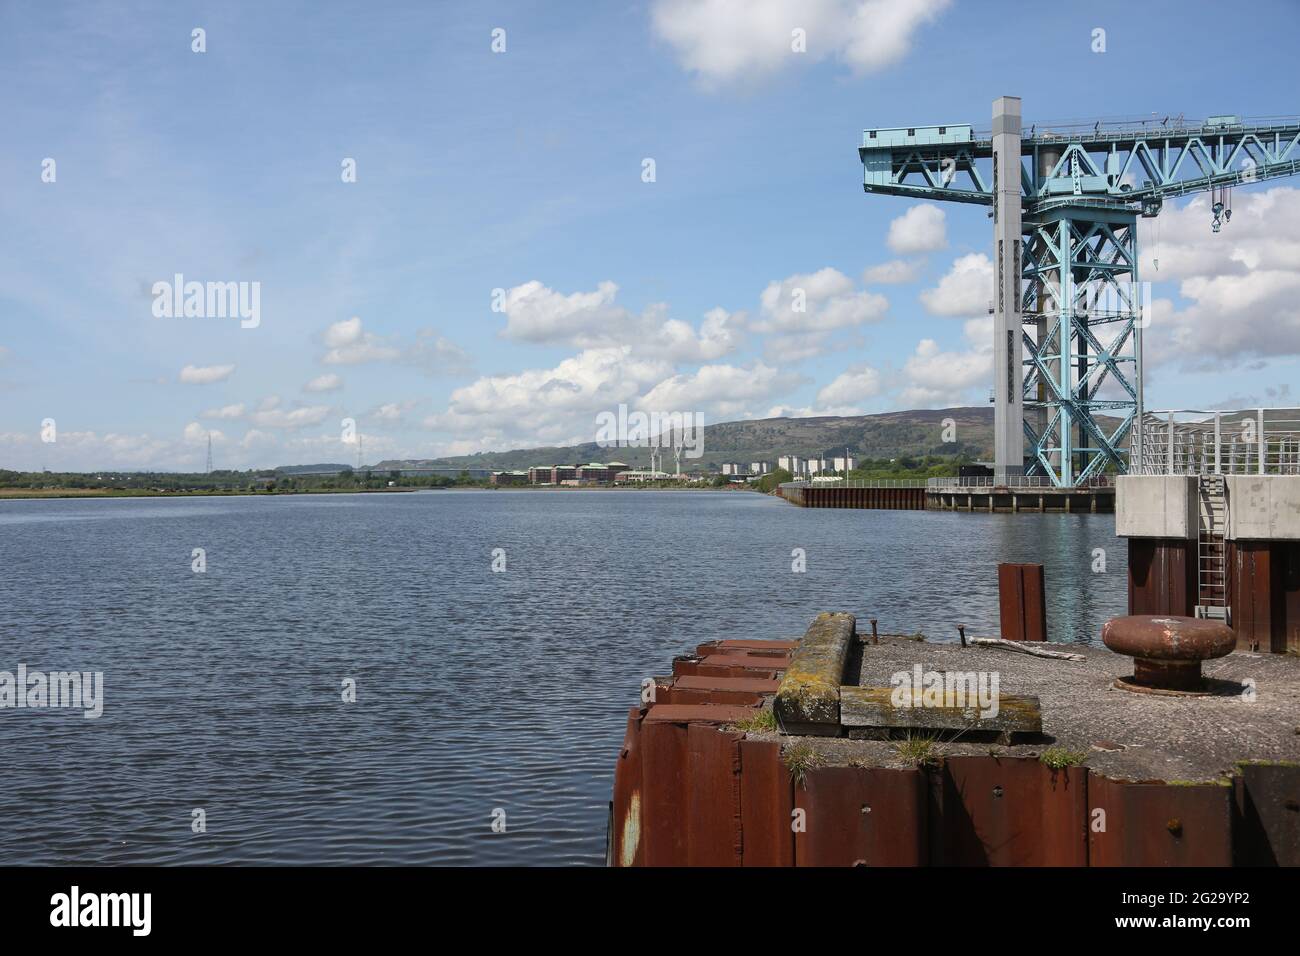 Titan Clydebank, more commonly known as the Titan Crane is a 150-foot-high (46 m) cantilever crane at Clydebank, West Dunbartonshire, Scotland. Stock Photo